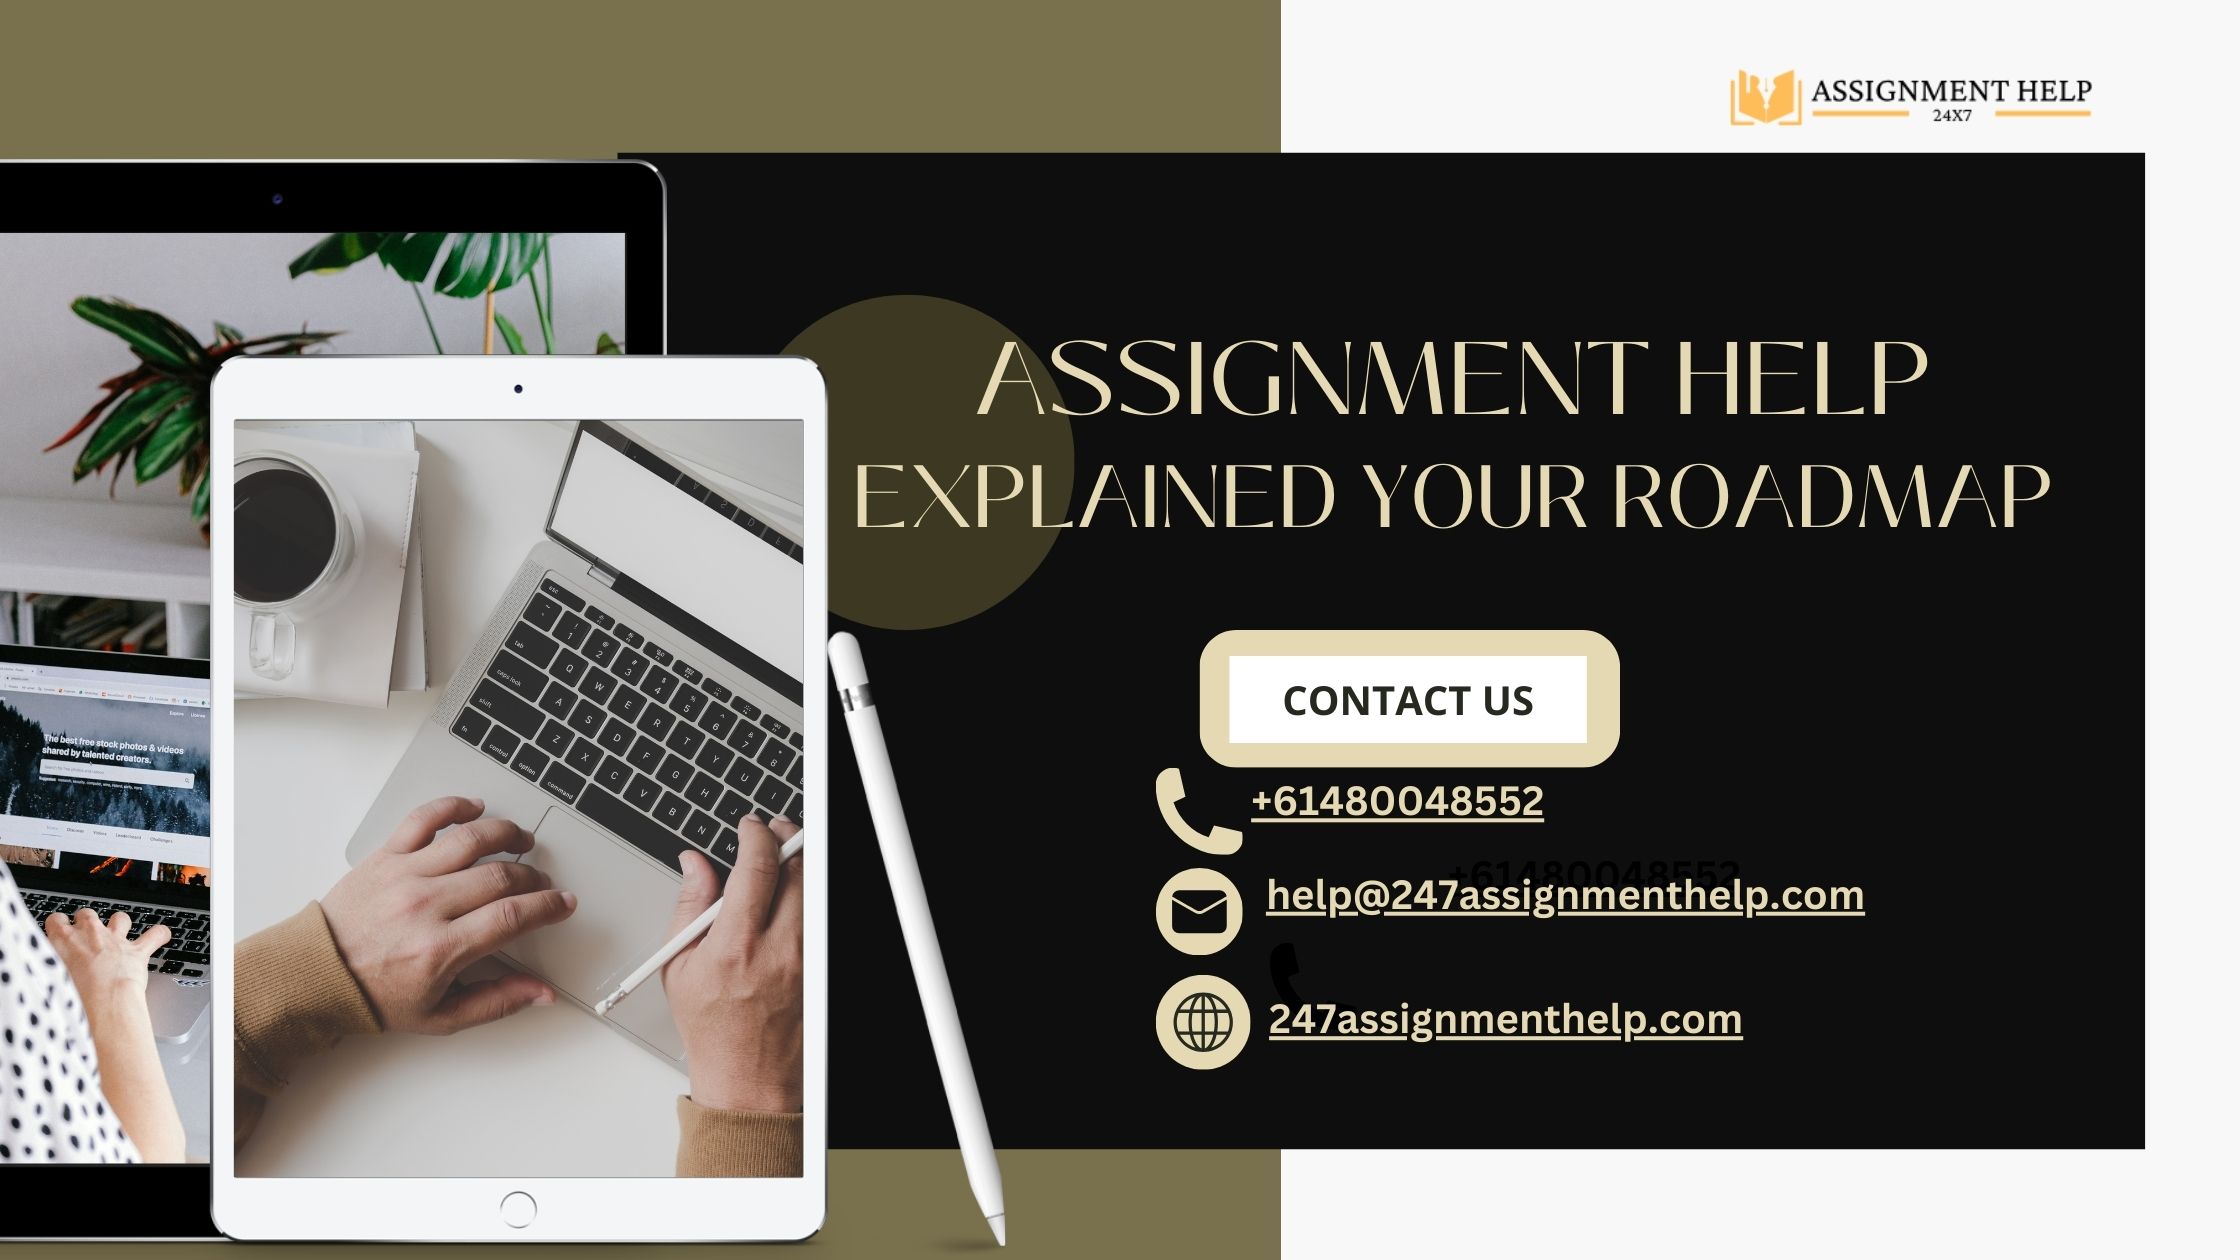 Assignment Help Explained Your Roadmap